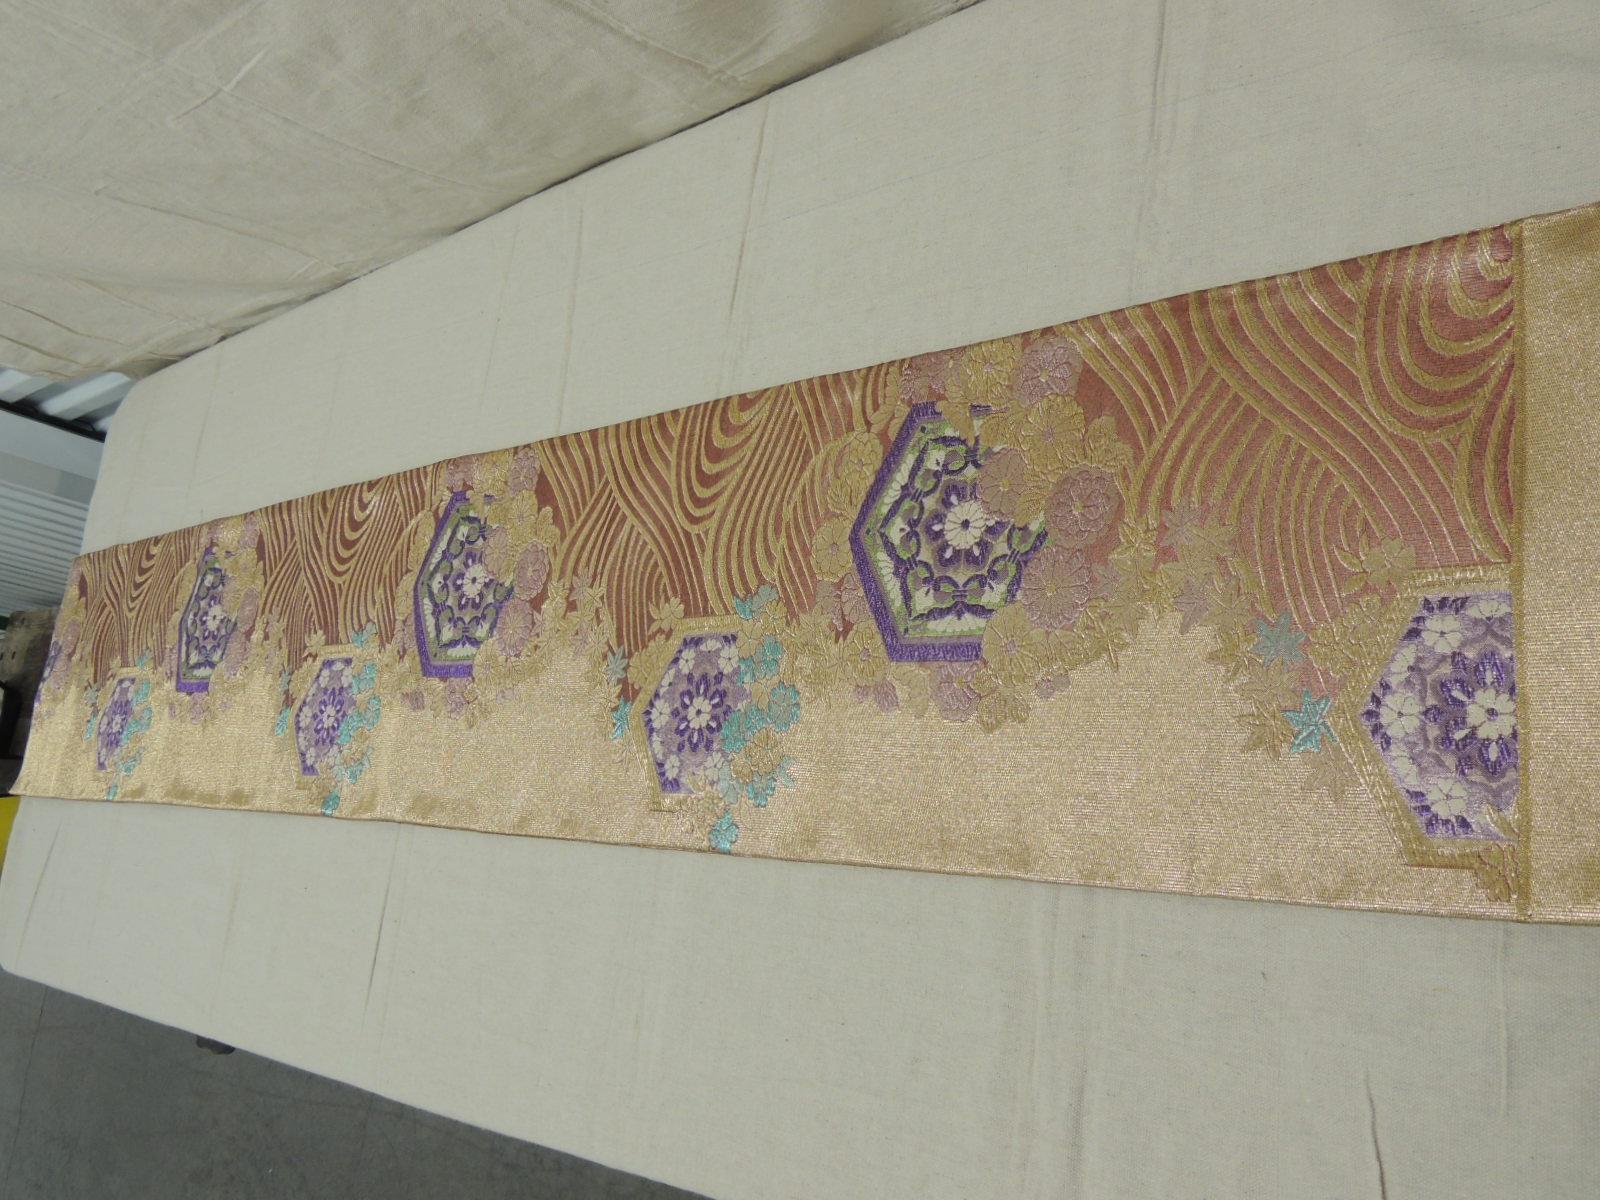 Long Golden Textured Woven Obi Textile Depicting Flowers in Bloom 3